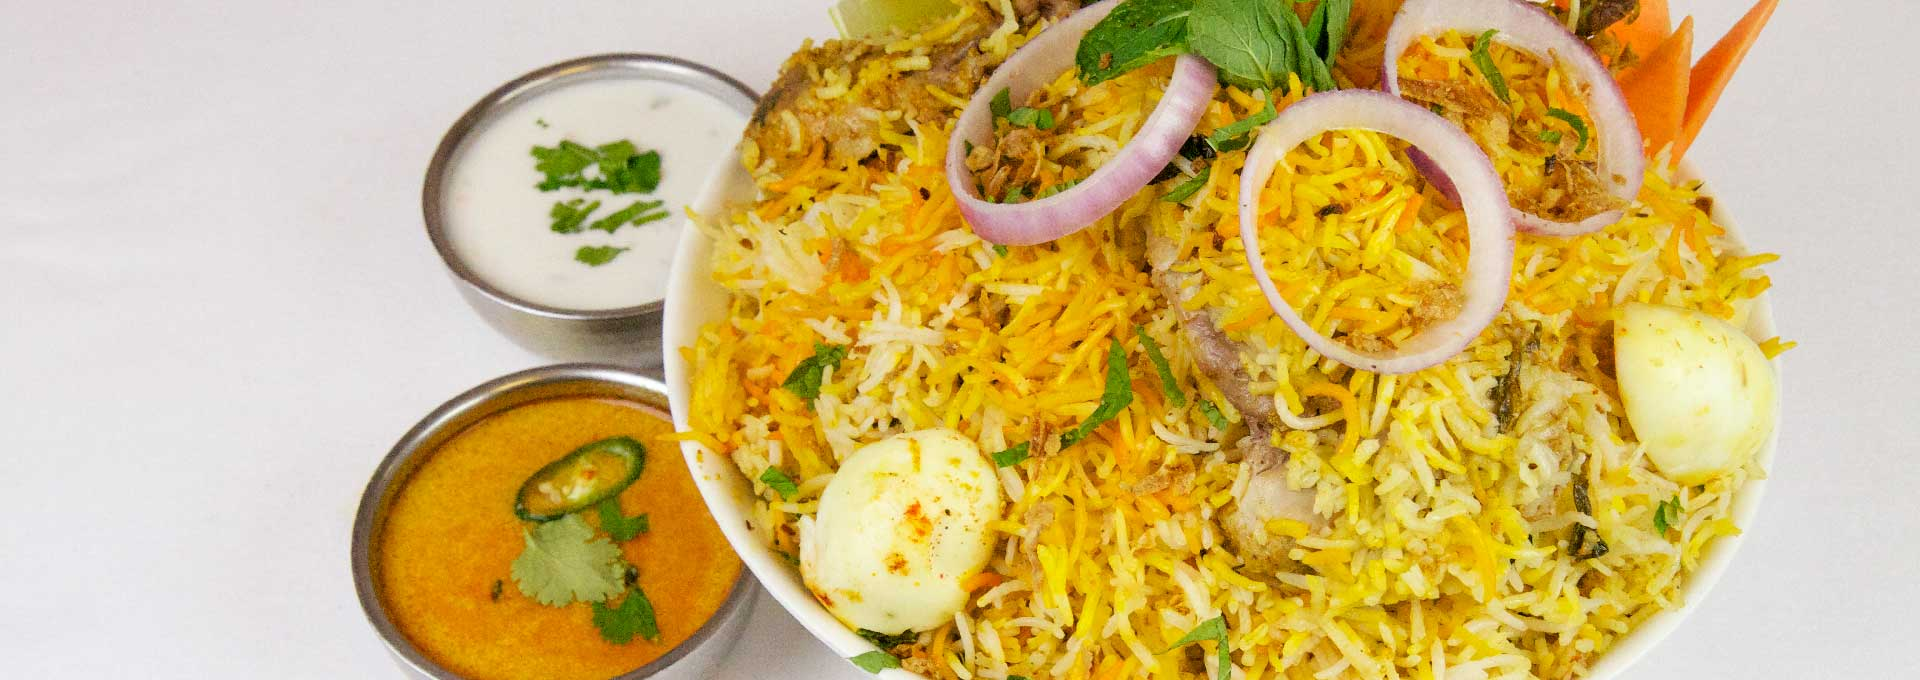 Delectable Veg Biryani with colorful vegetables and aromatic spices.